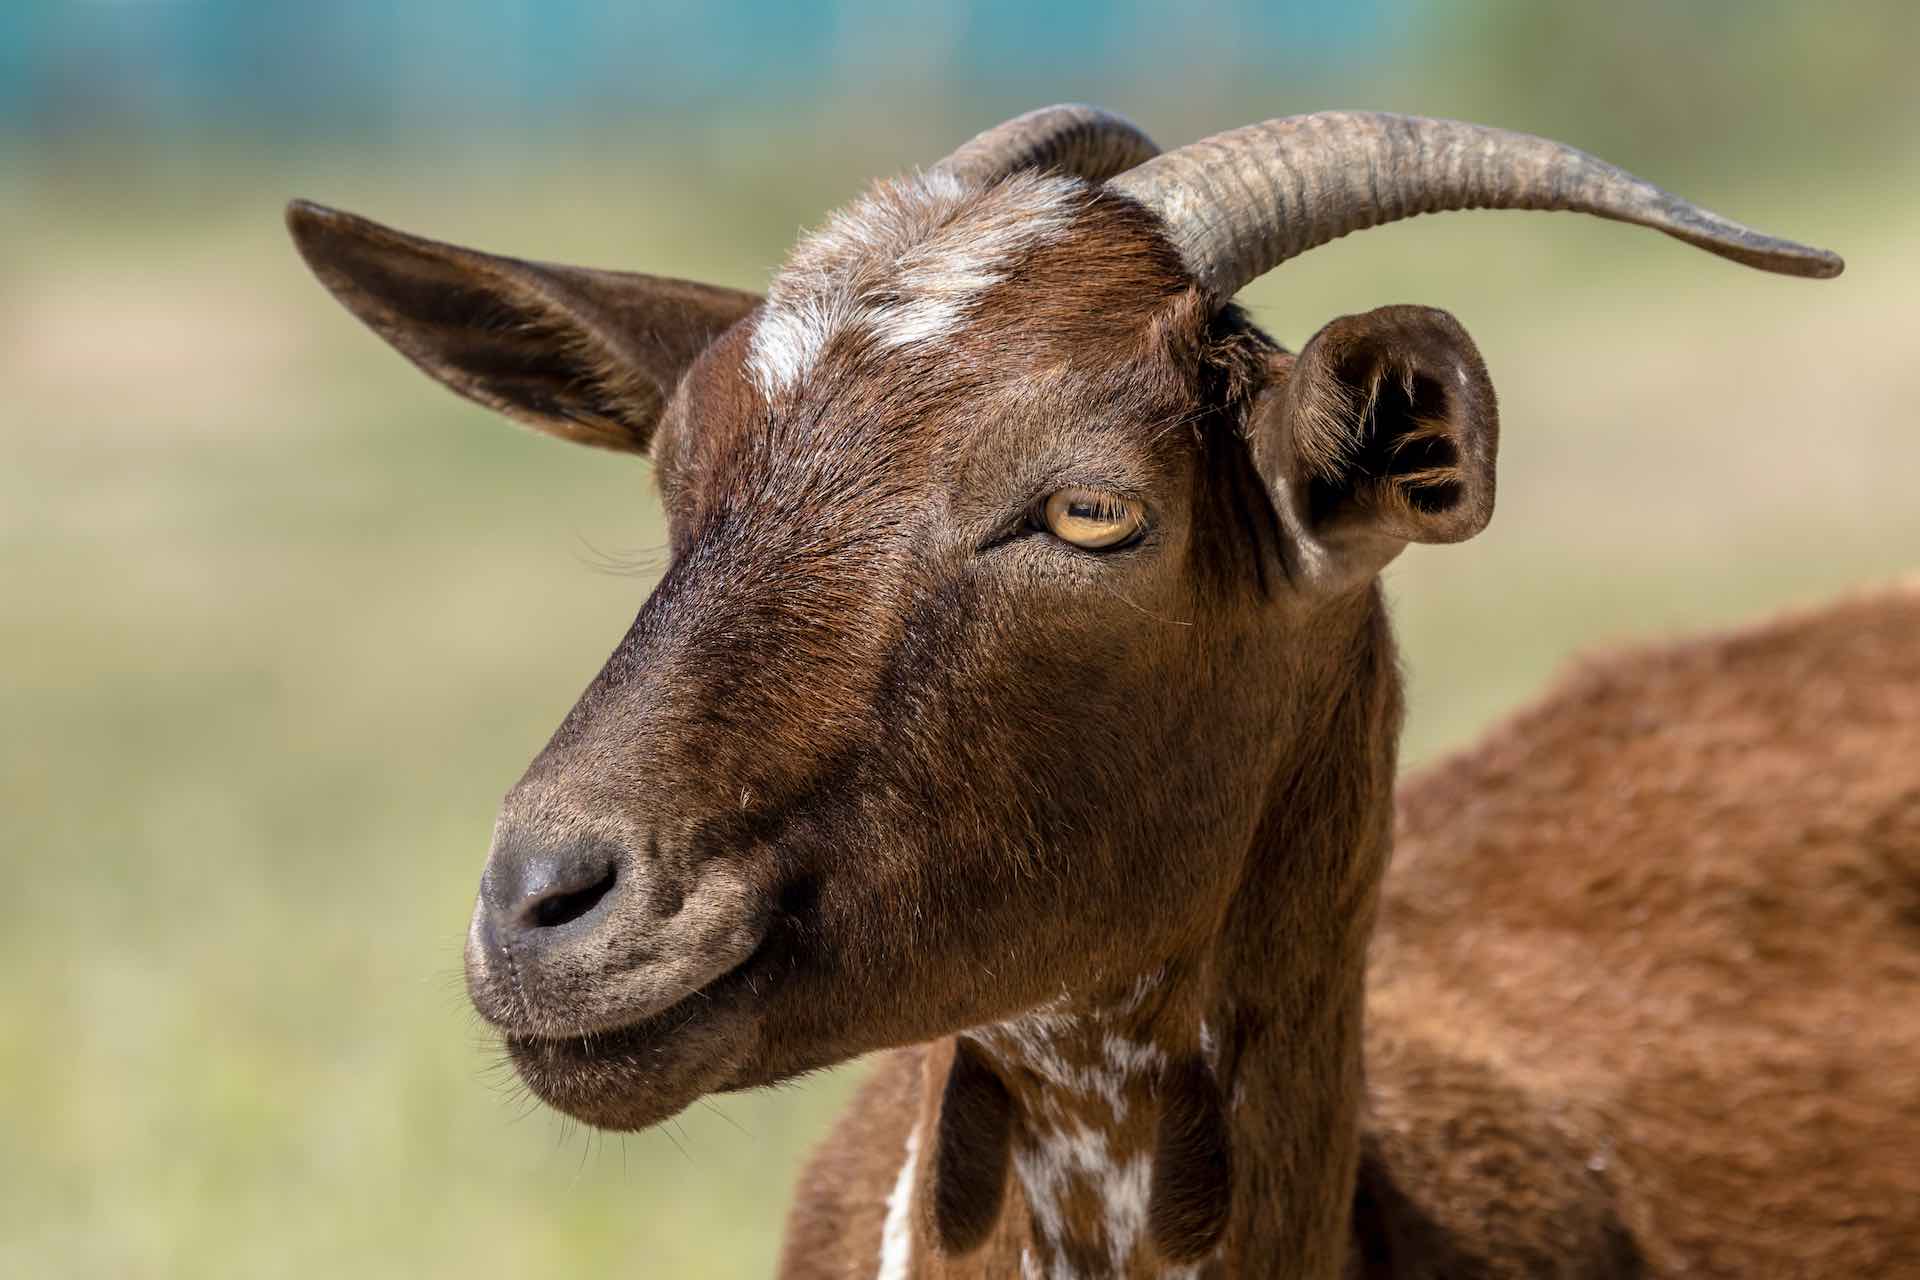 Pakistani dream of matching Indian IIT turns into a goat market due to negligence